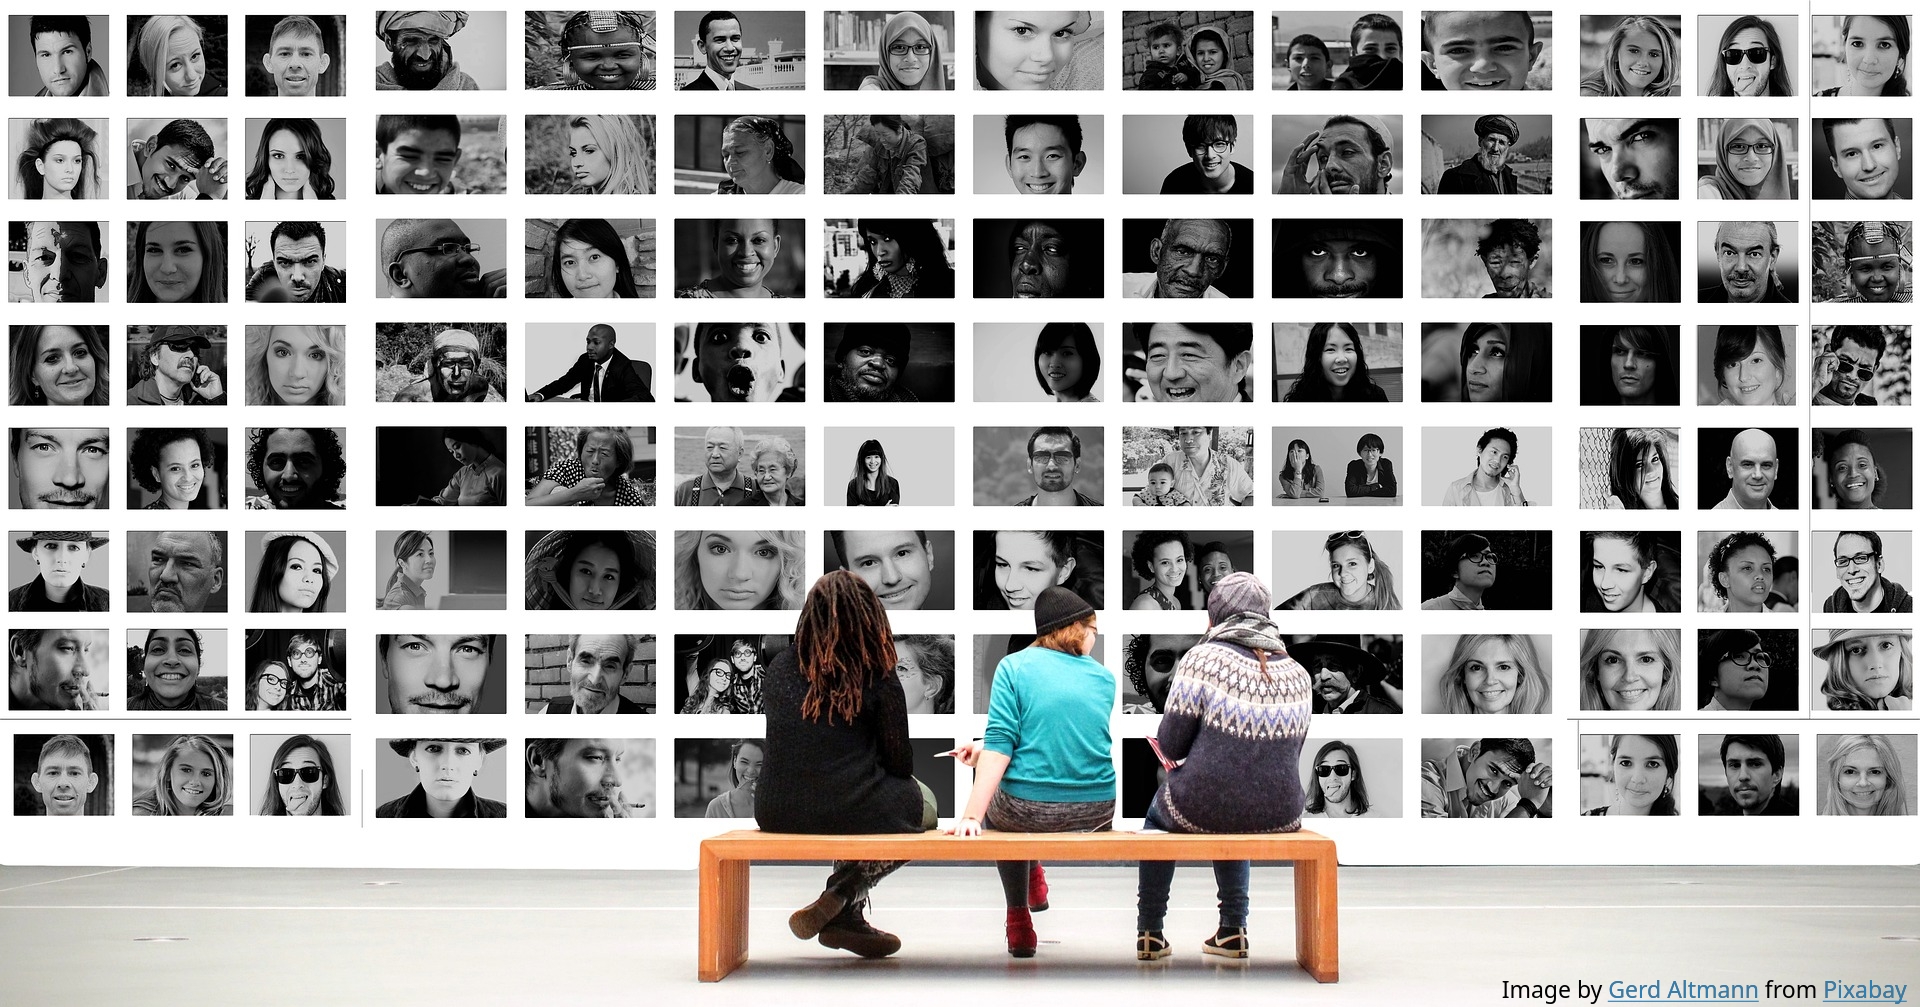 Three people sitting in front of the wall of portraits photographies. Image by Gerd Altmann from Pixabay.